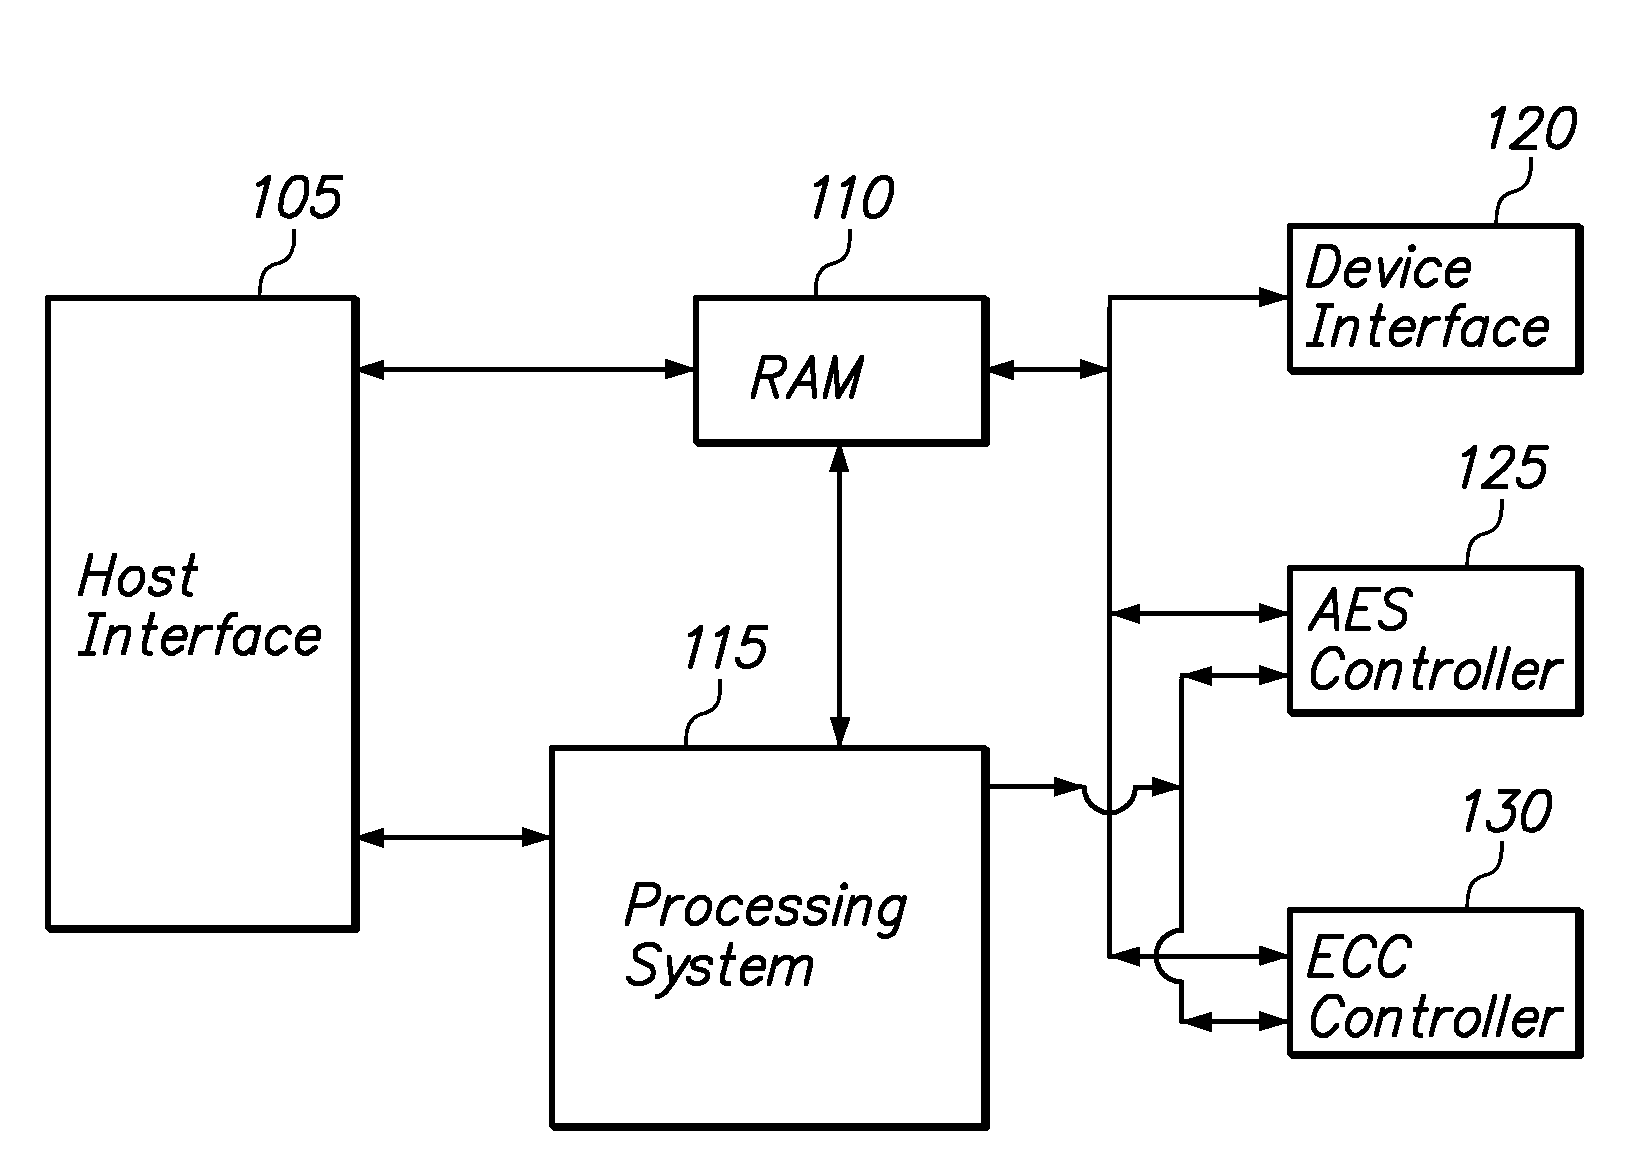 Method and Apparatus of Providing the Security and Error Correction Capability for Memory Storage Devices